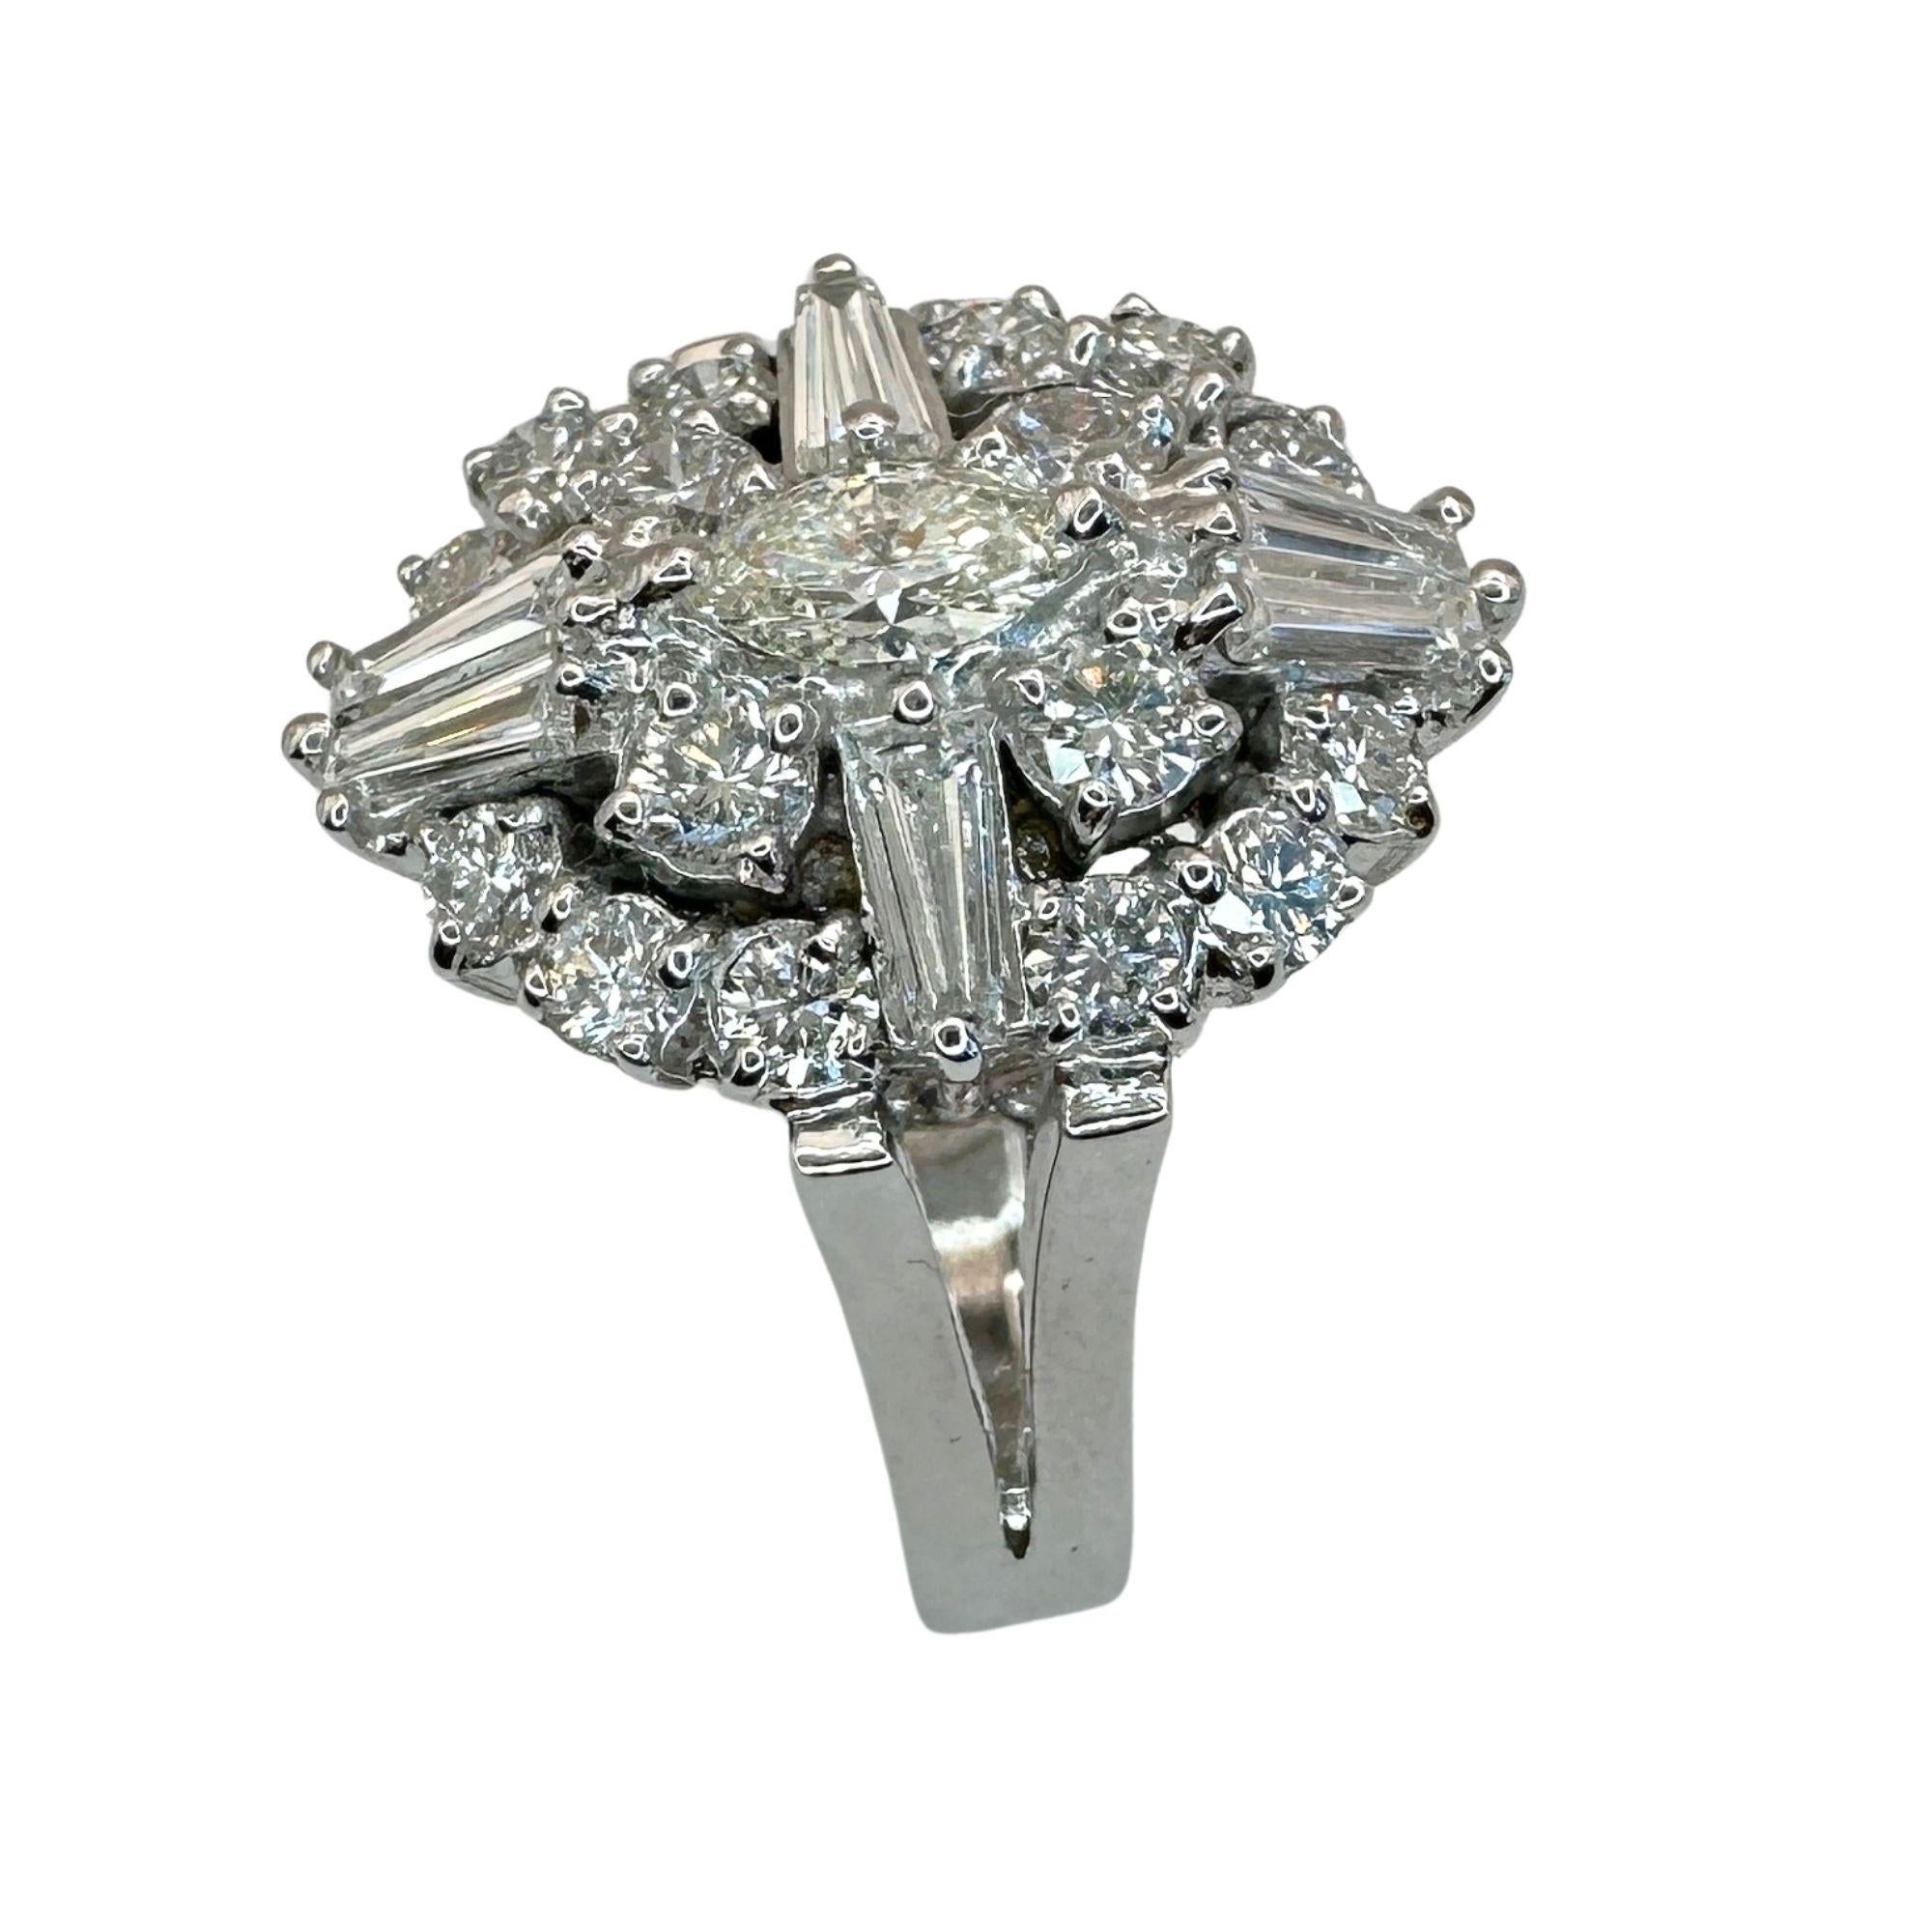 Indulge in luxury with this stunning 18k Baguette and Marquise Cut Diamond Ring. Crafted from 18k white gold, this exclusive piece features 1.55 carats of dazzling diamonds in a unique combination of cuts. In excellent condition with a weight of